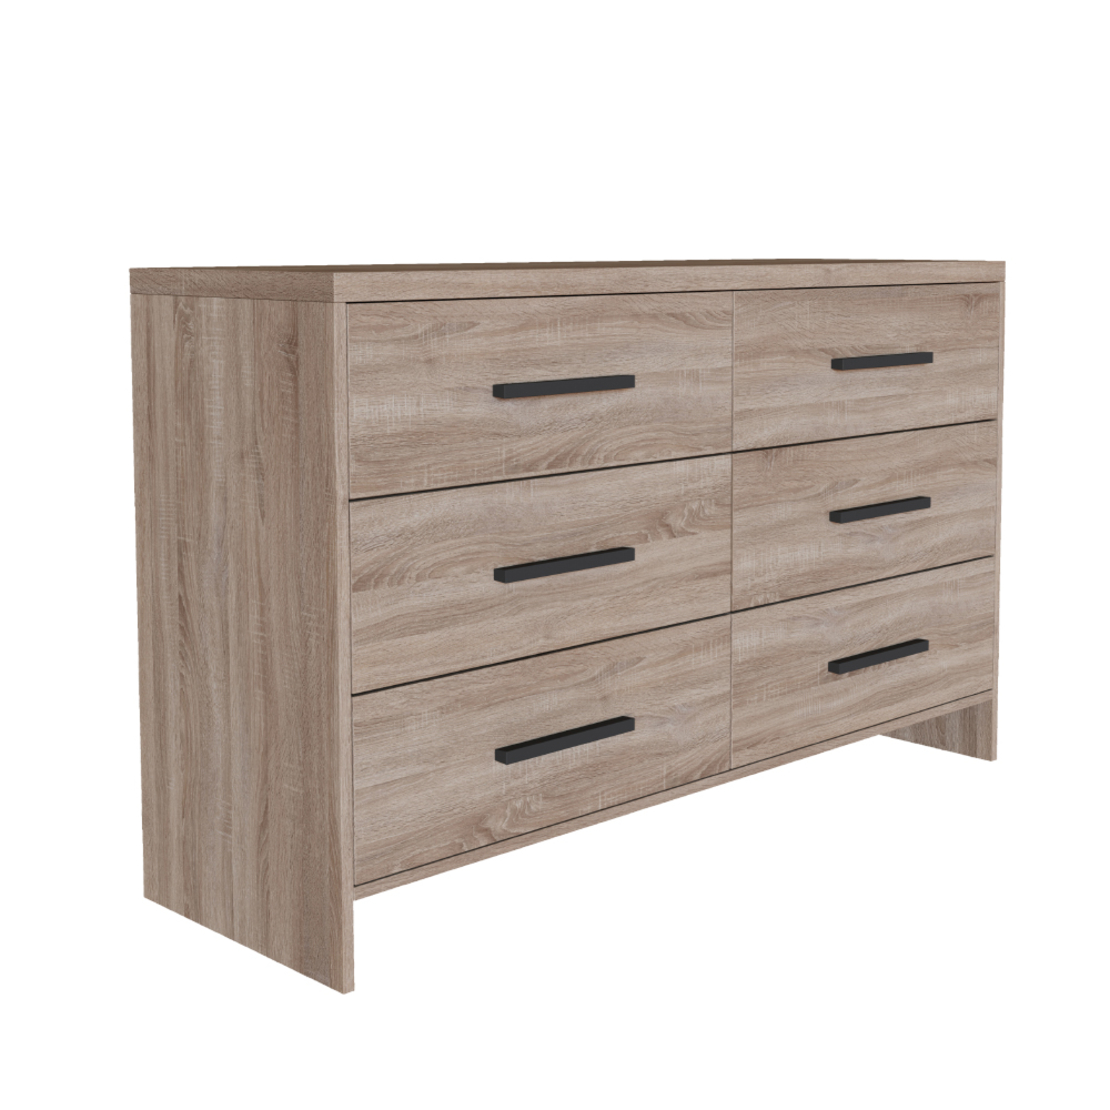 MILKY 6DRAWERS HONEYCOMB SONOMA CHIPBOARD WITH MELAMINE E1 PRC